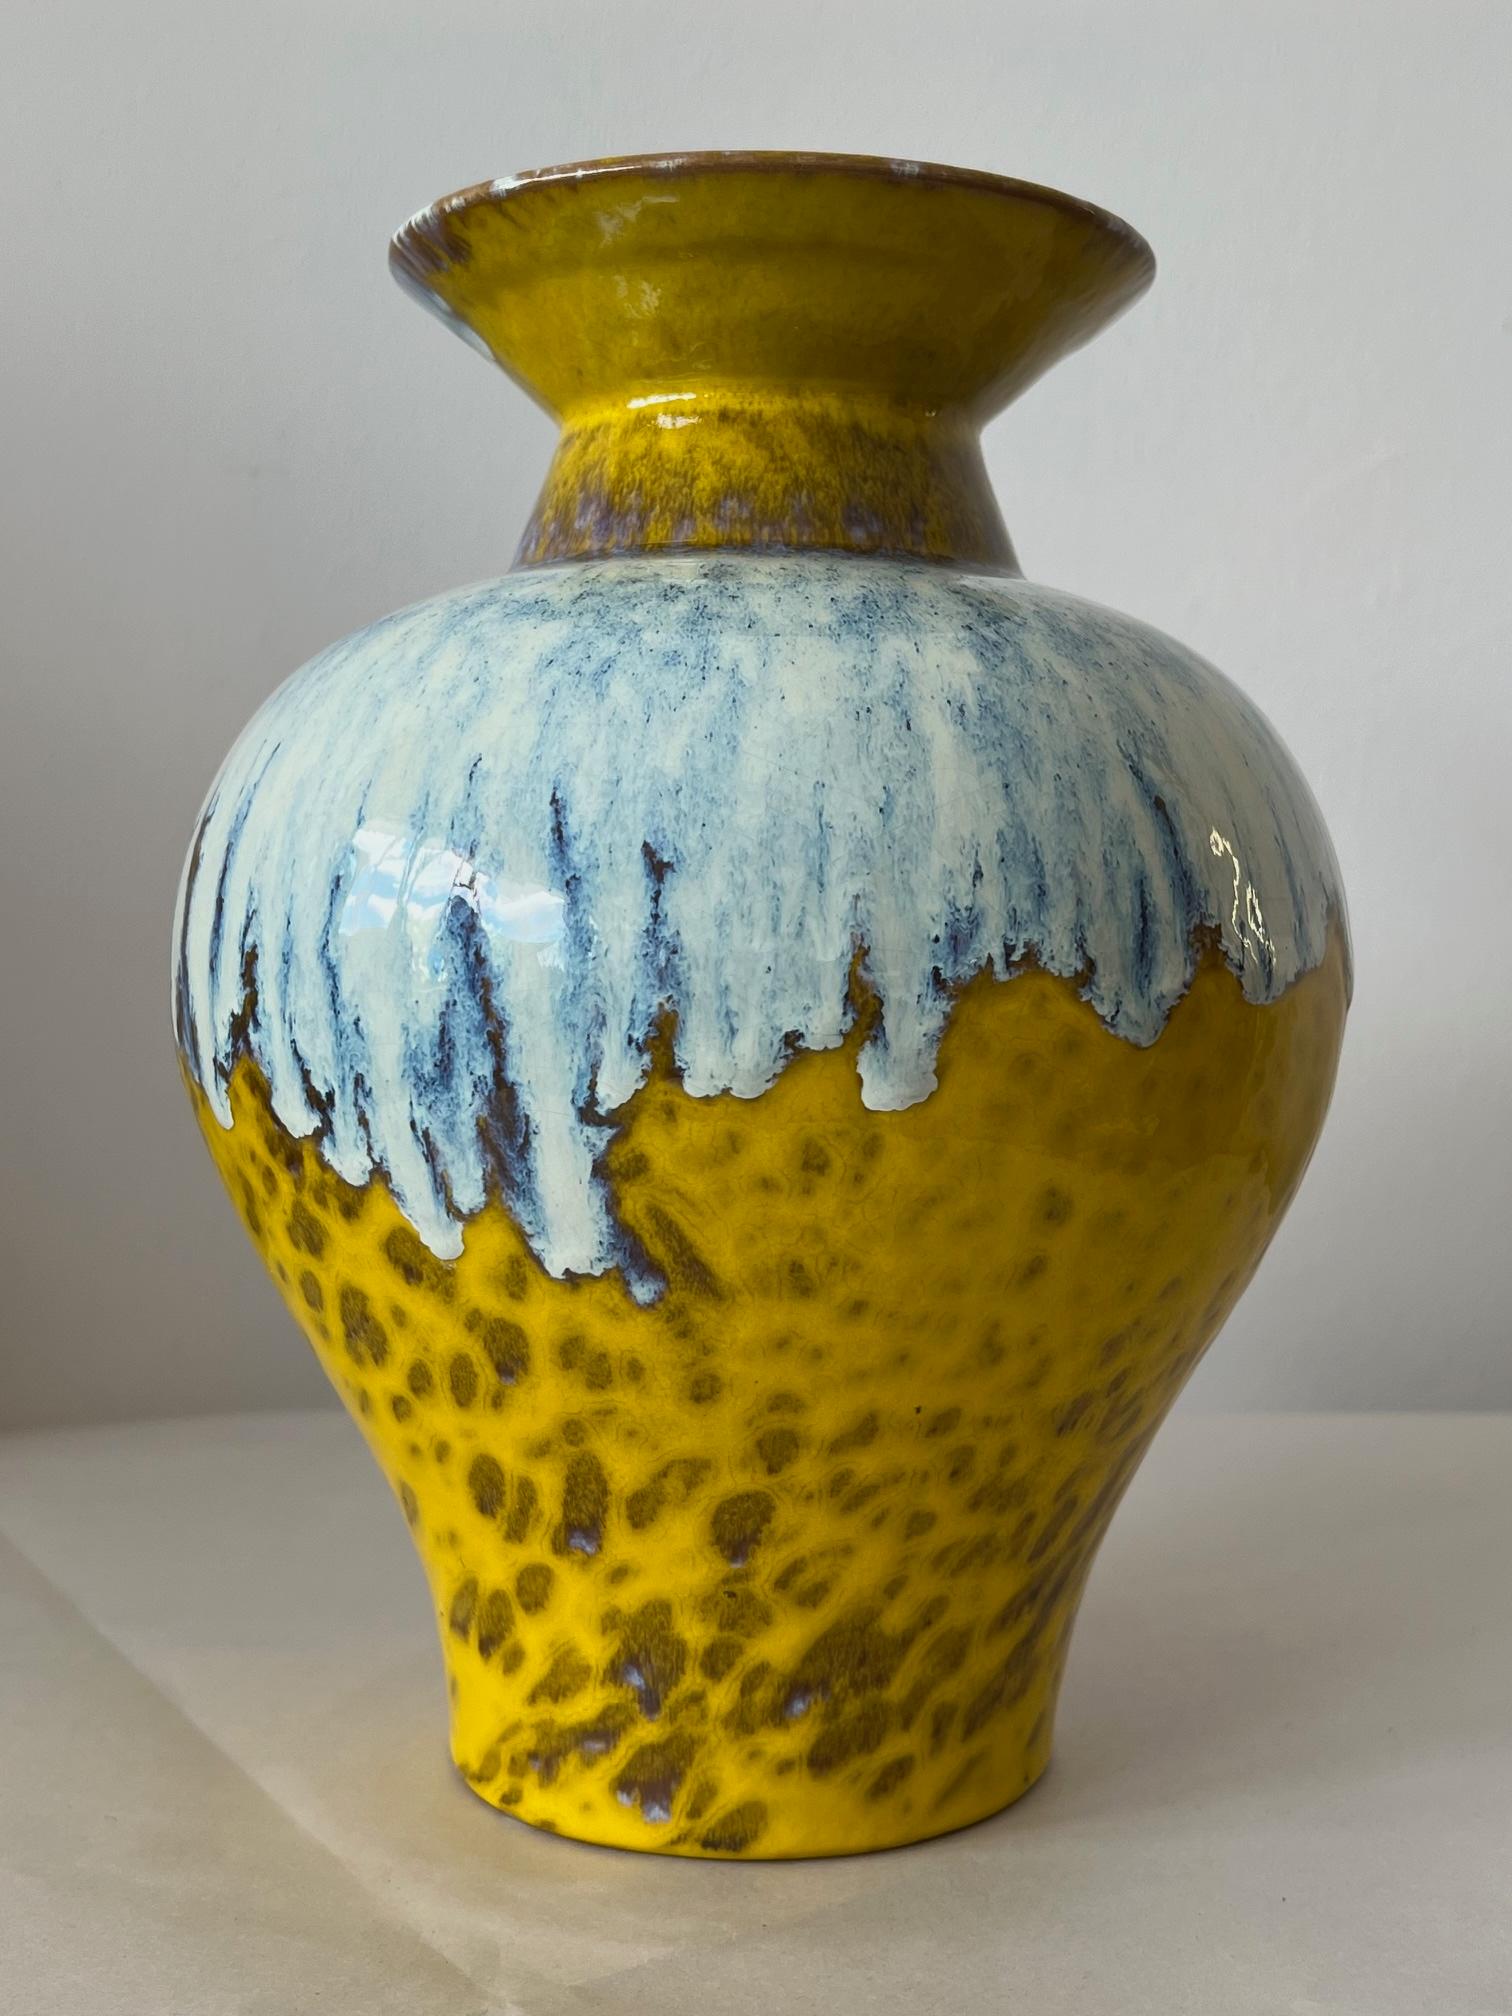 A beautiful and substantial Raymor vase in mixed glazes. Vibrant yellow, brown, blue. Made in Italy ca' 1970's.